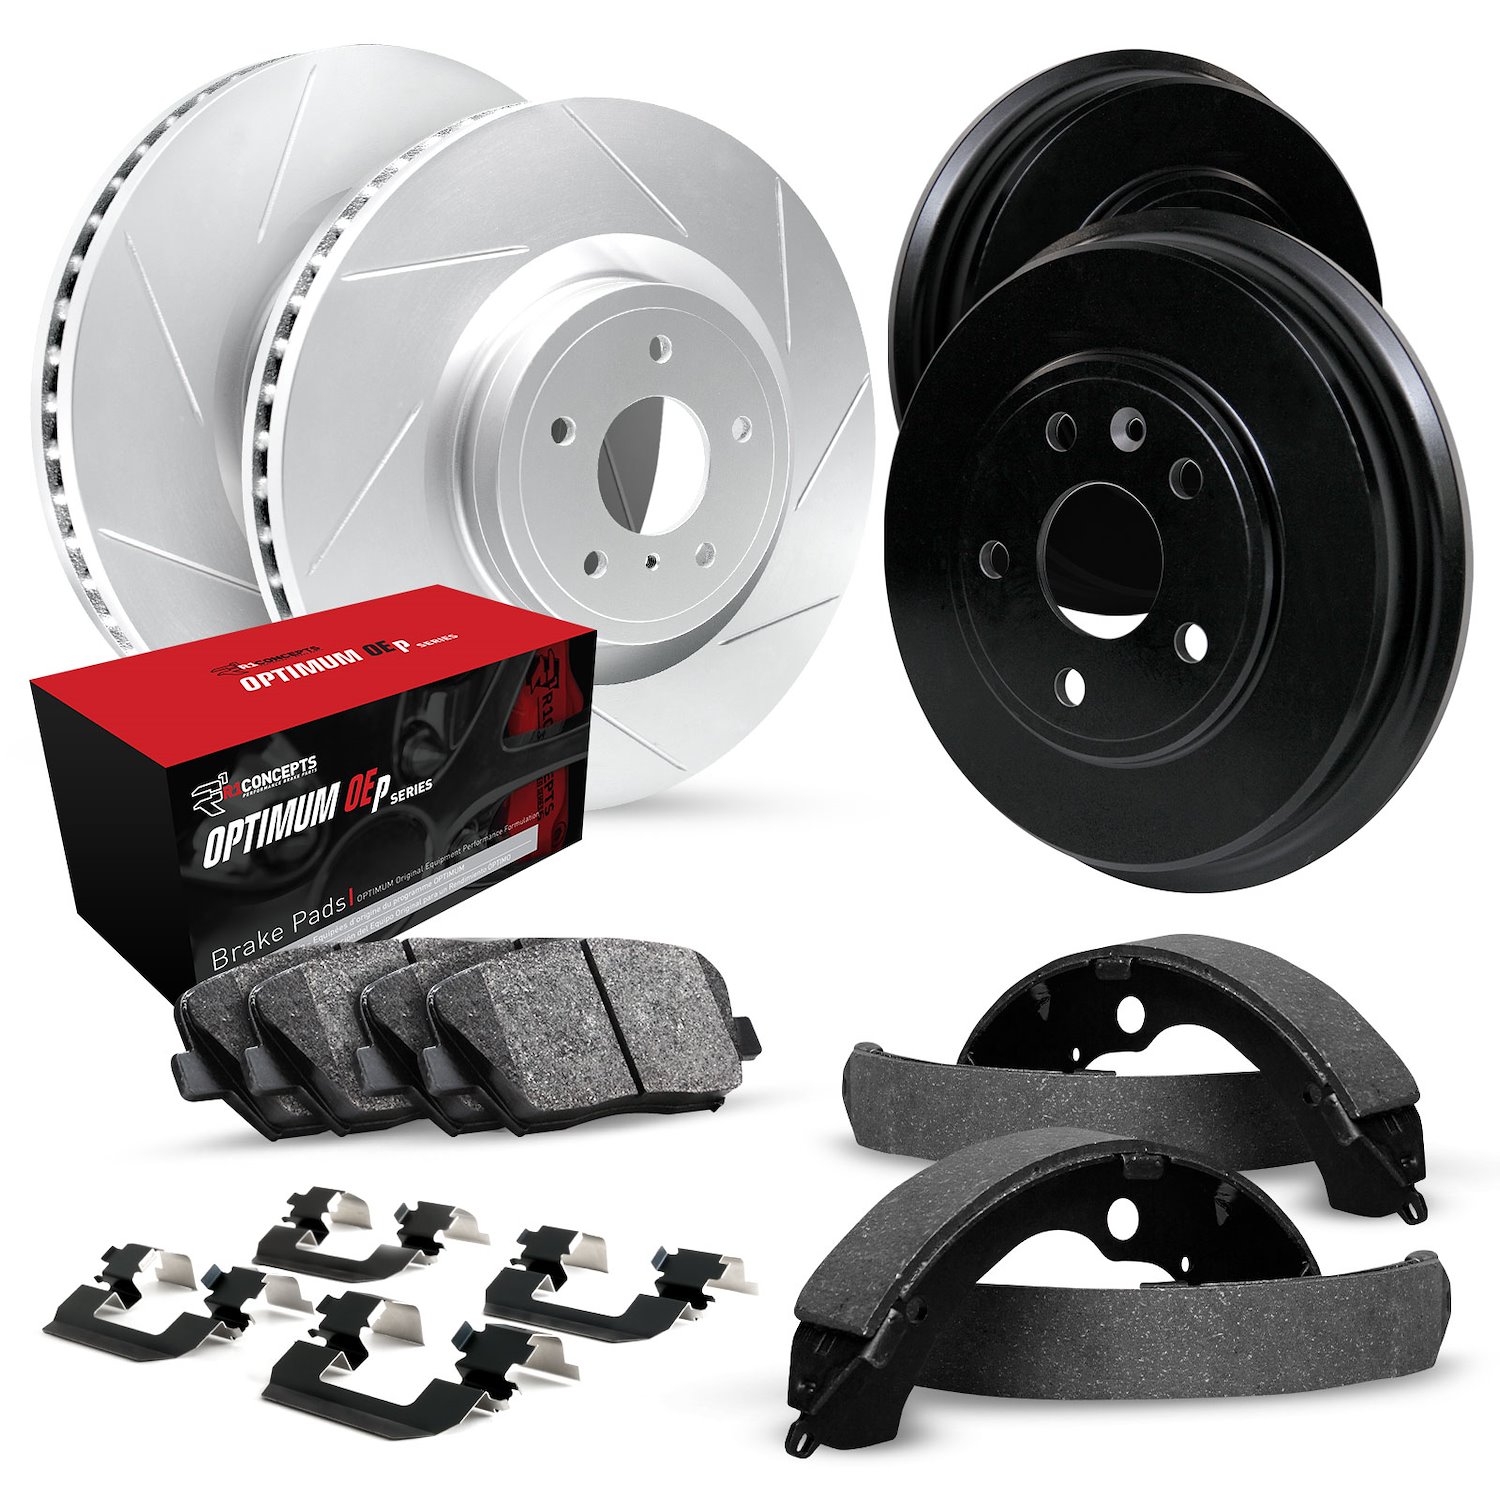 GEO-Carbon Slotted Brake Rotor & Drum Set w/Optimum OE Pads, Shoes, & Hardware, 1986-1994 Ford/Lincoln/Mercury/Mazda